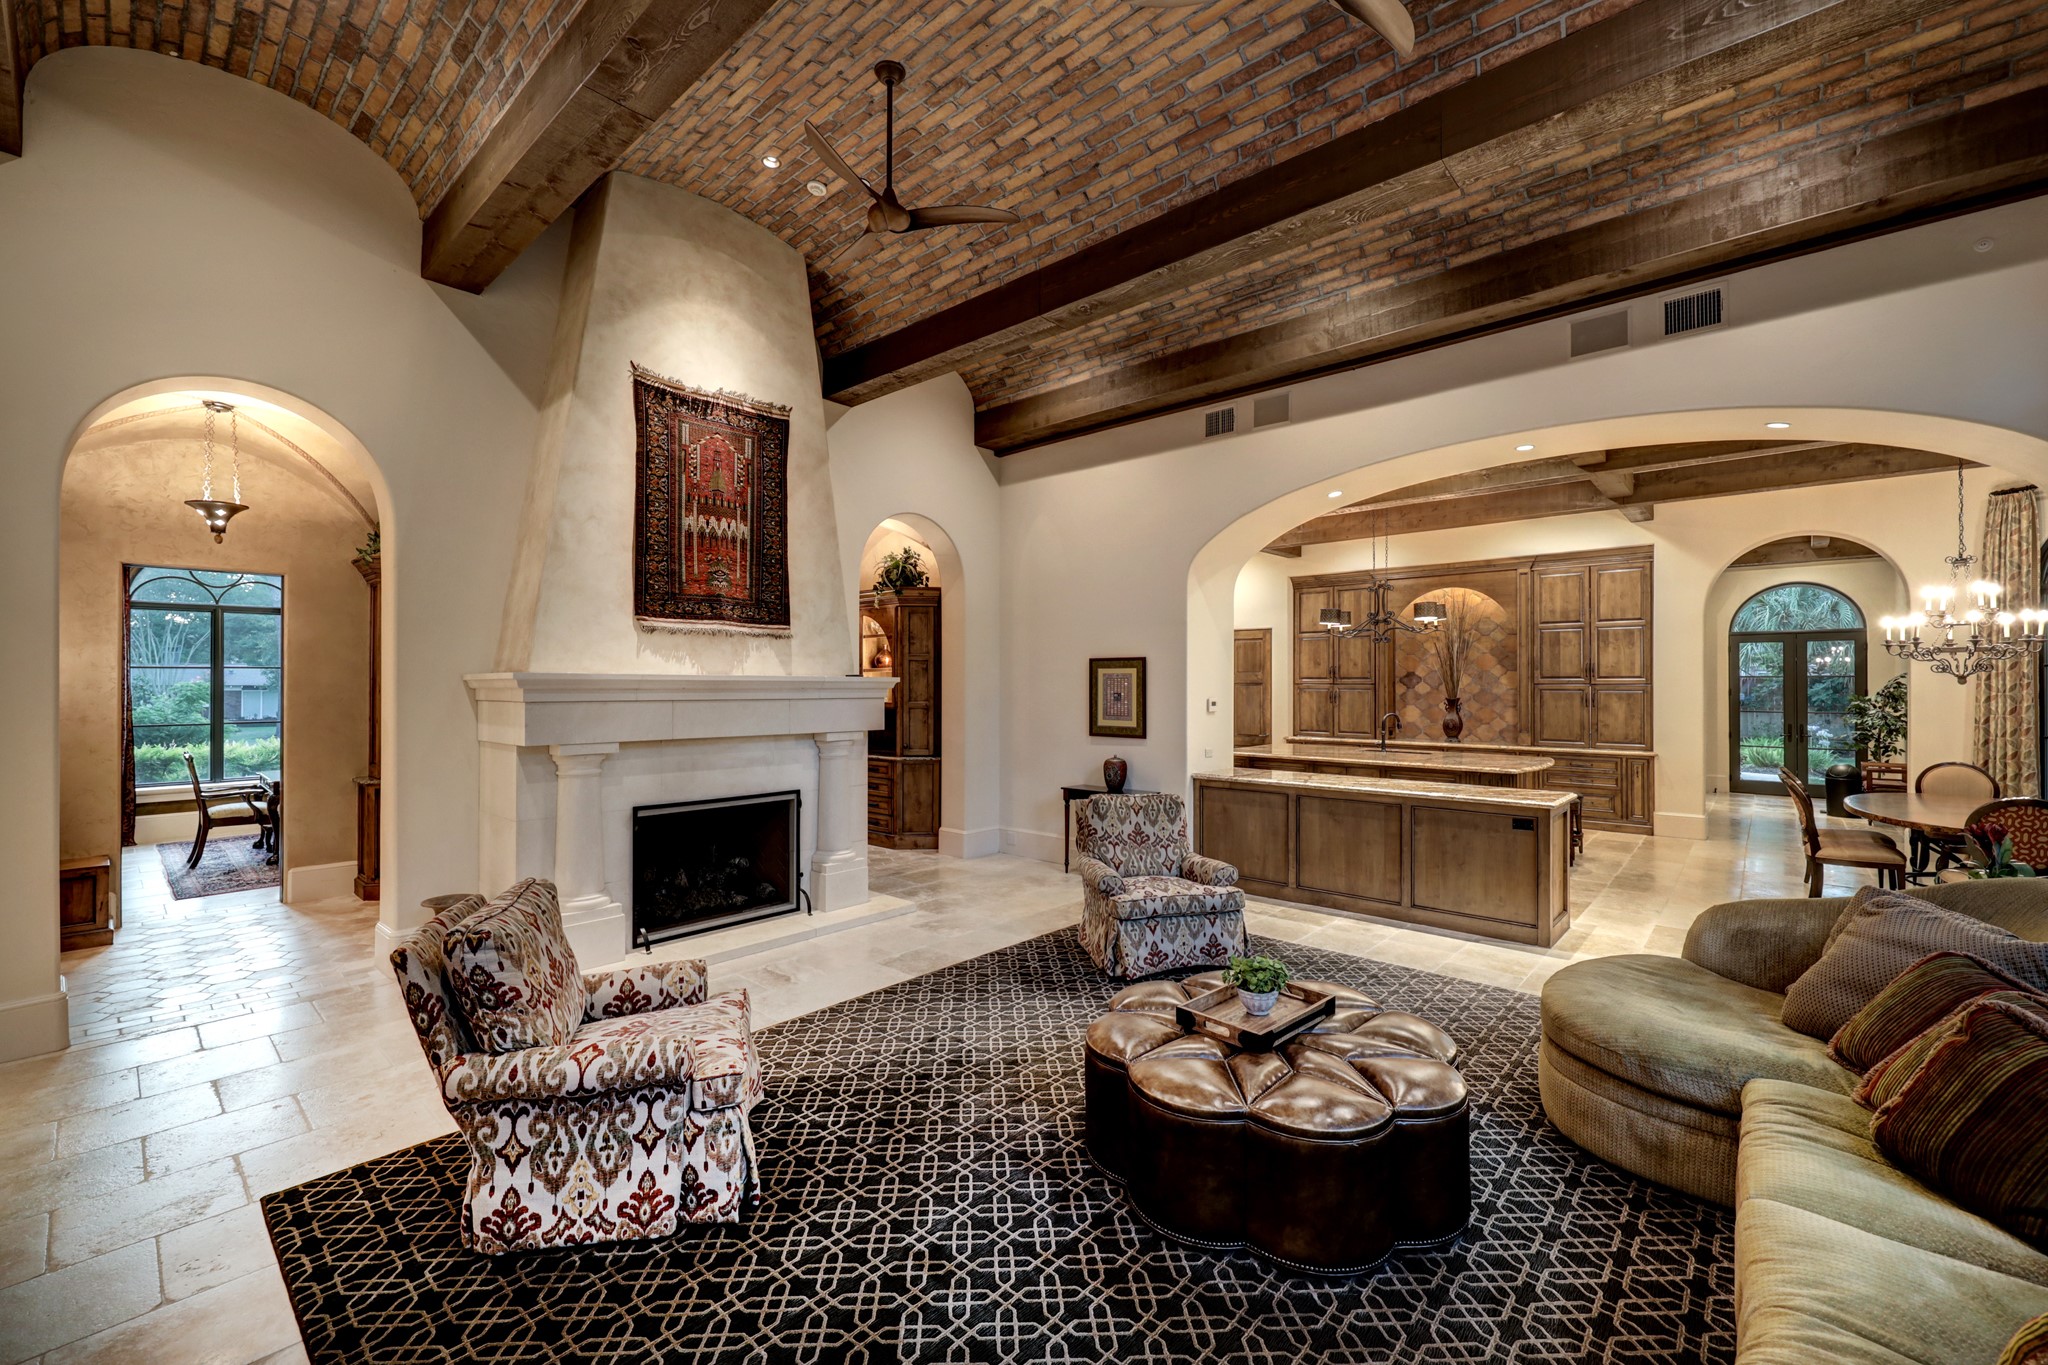 View from family room facing the stone fireplace and arched entryways to the wet bar